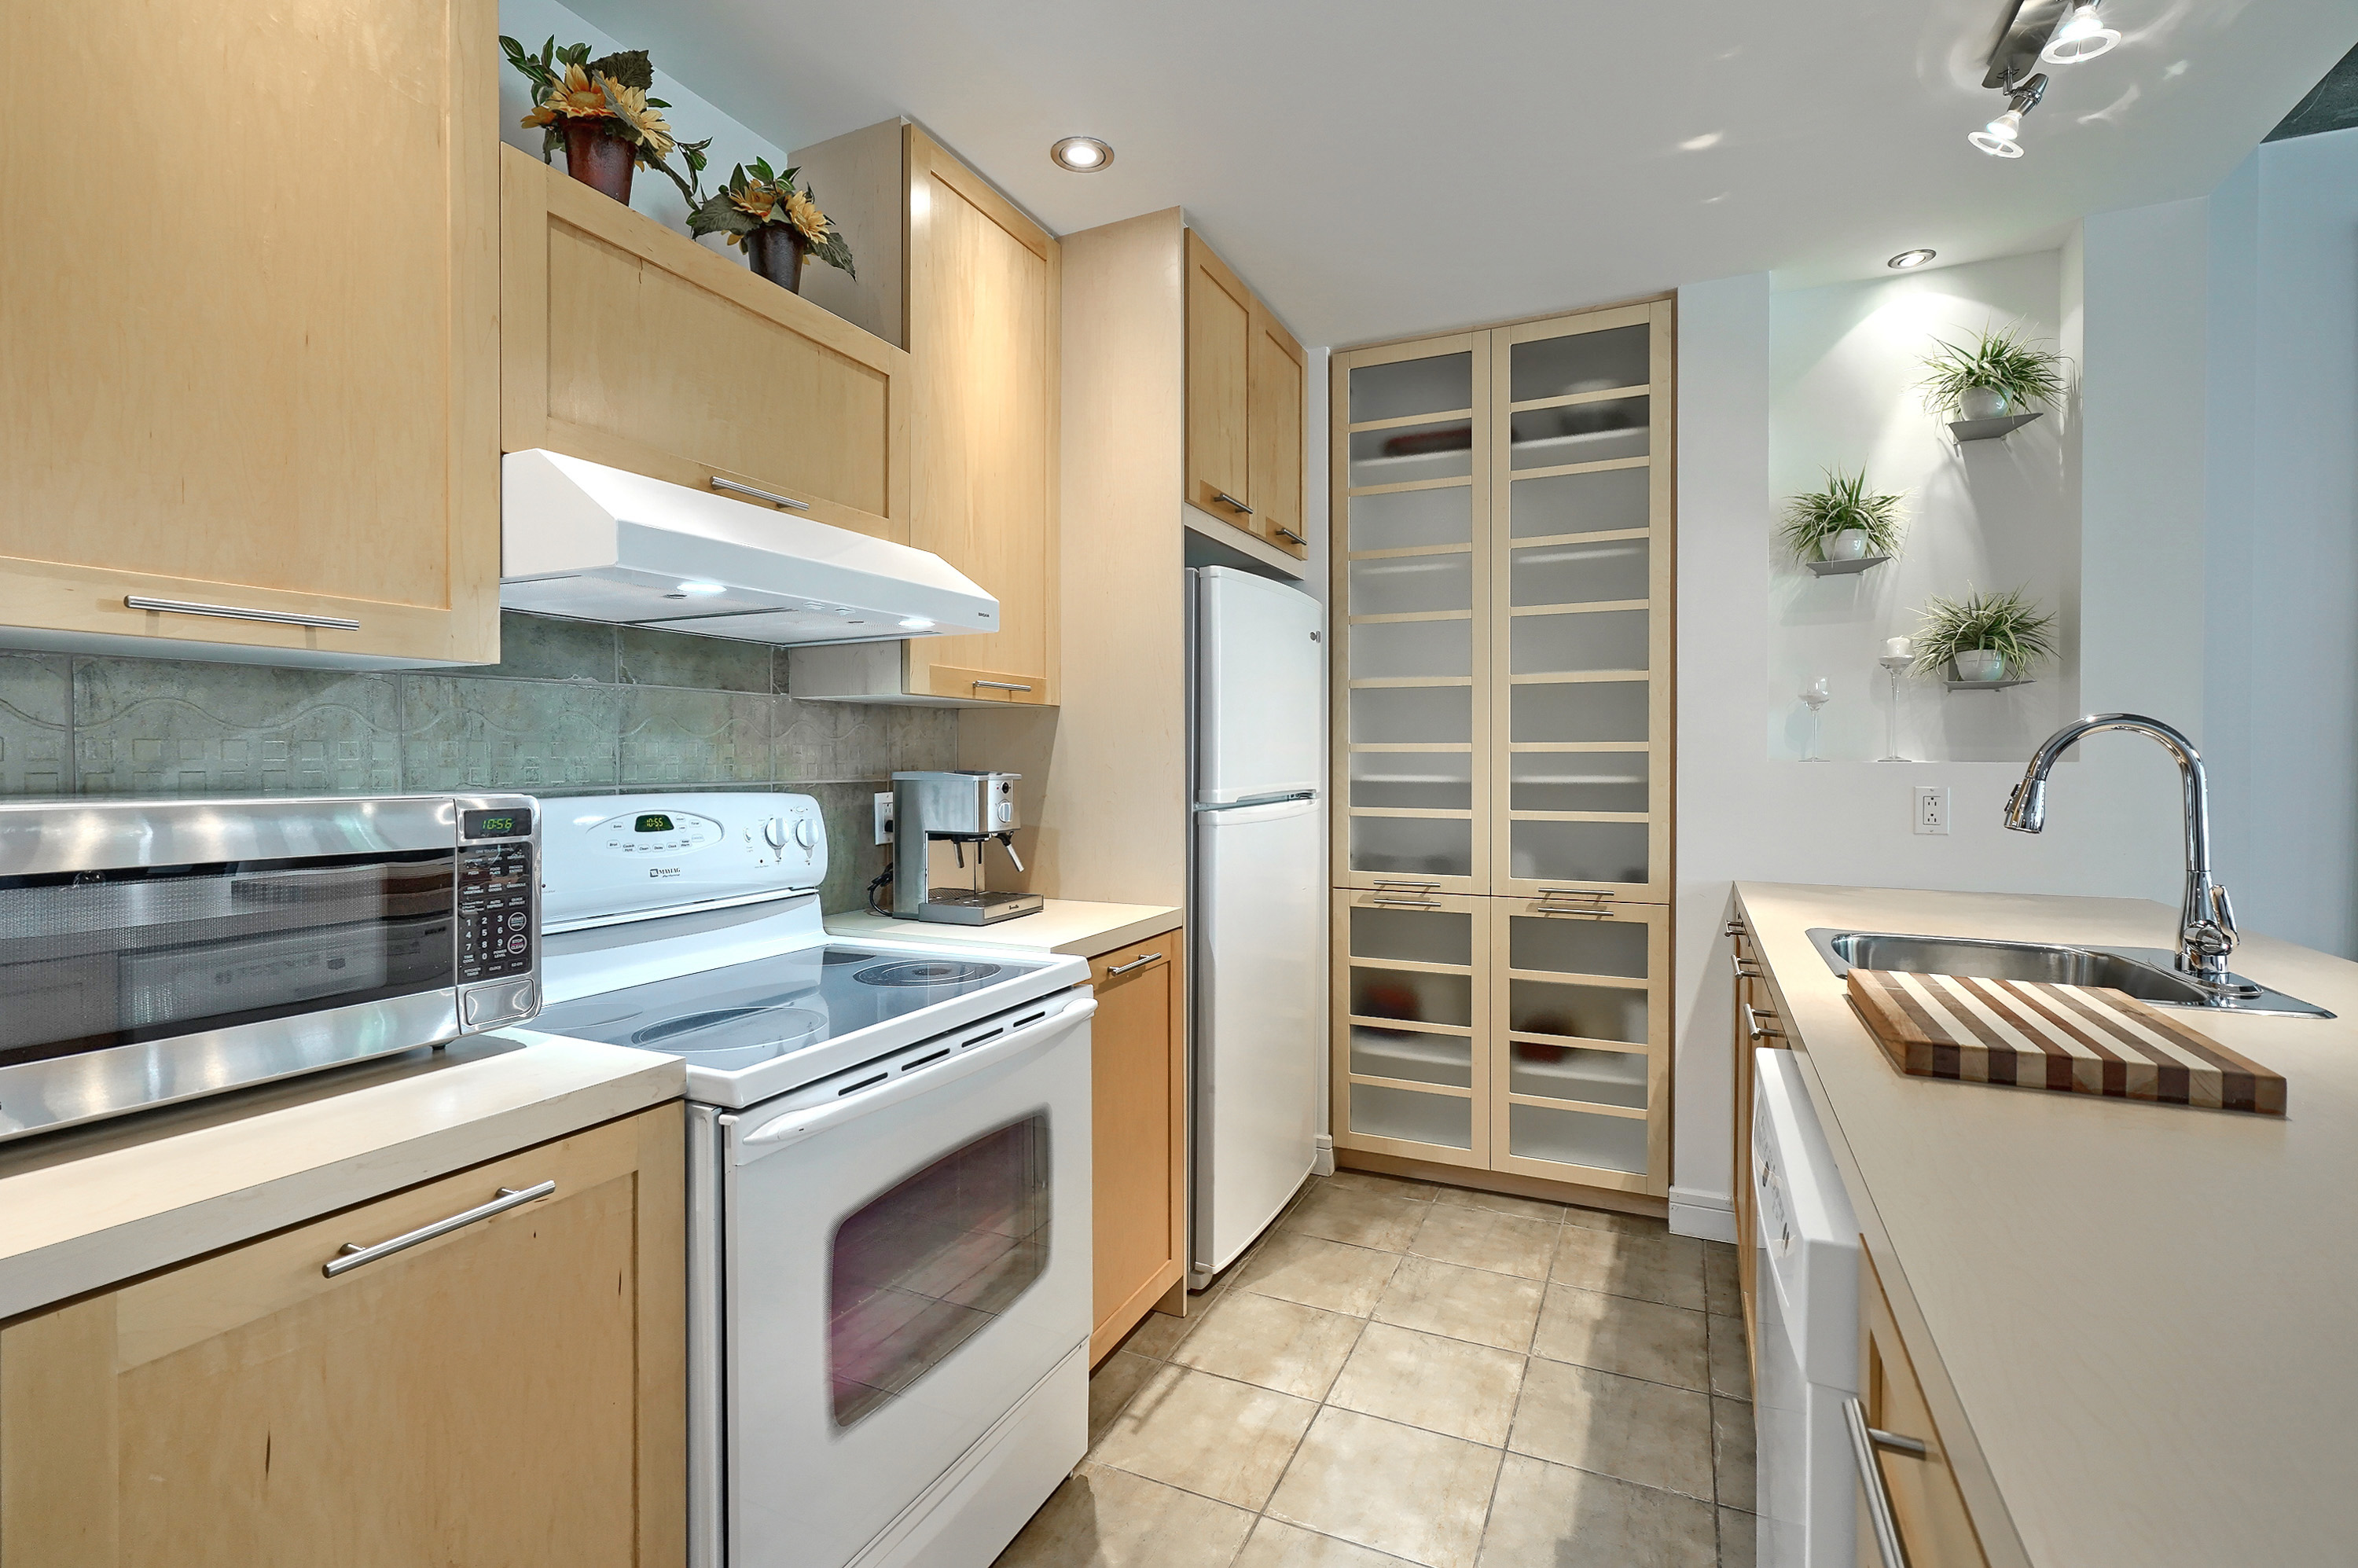 View of the kitchen area showing the appliances. There is plenty of storage in this modern kitchen in light wood and white. Another reason to choose this furnished apartment for rent Montreal